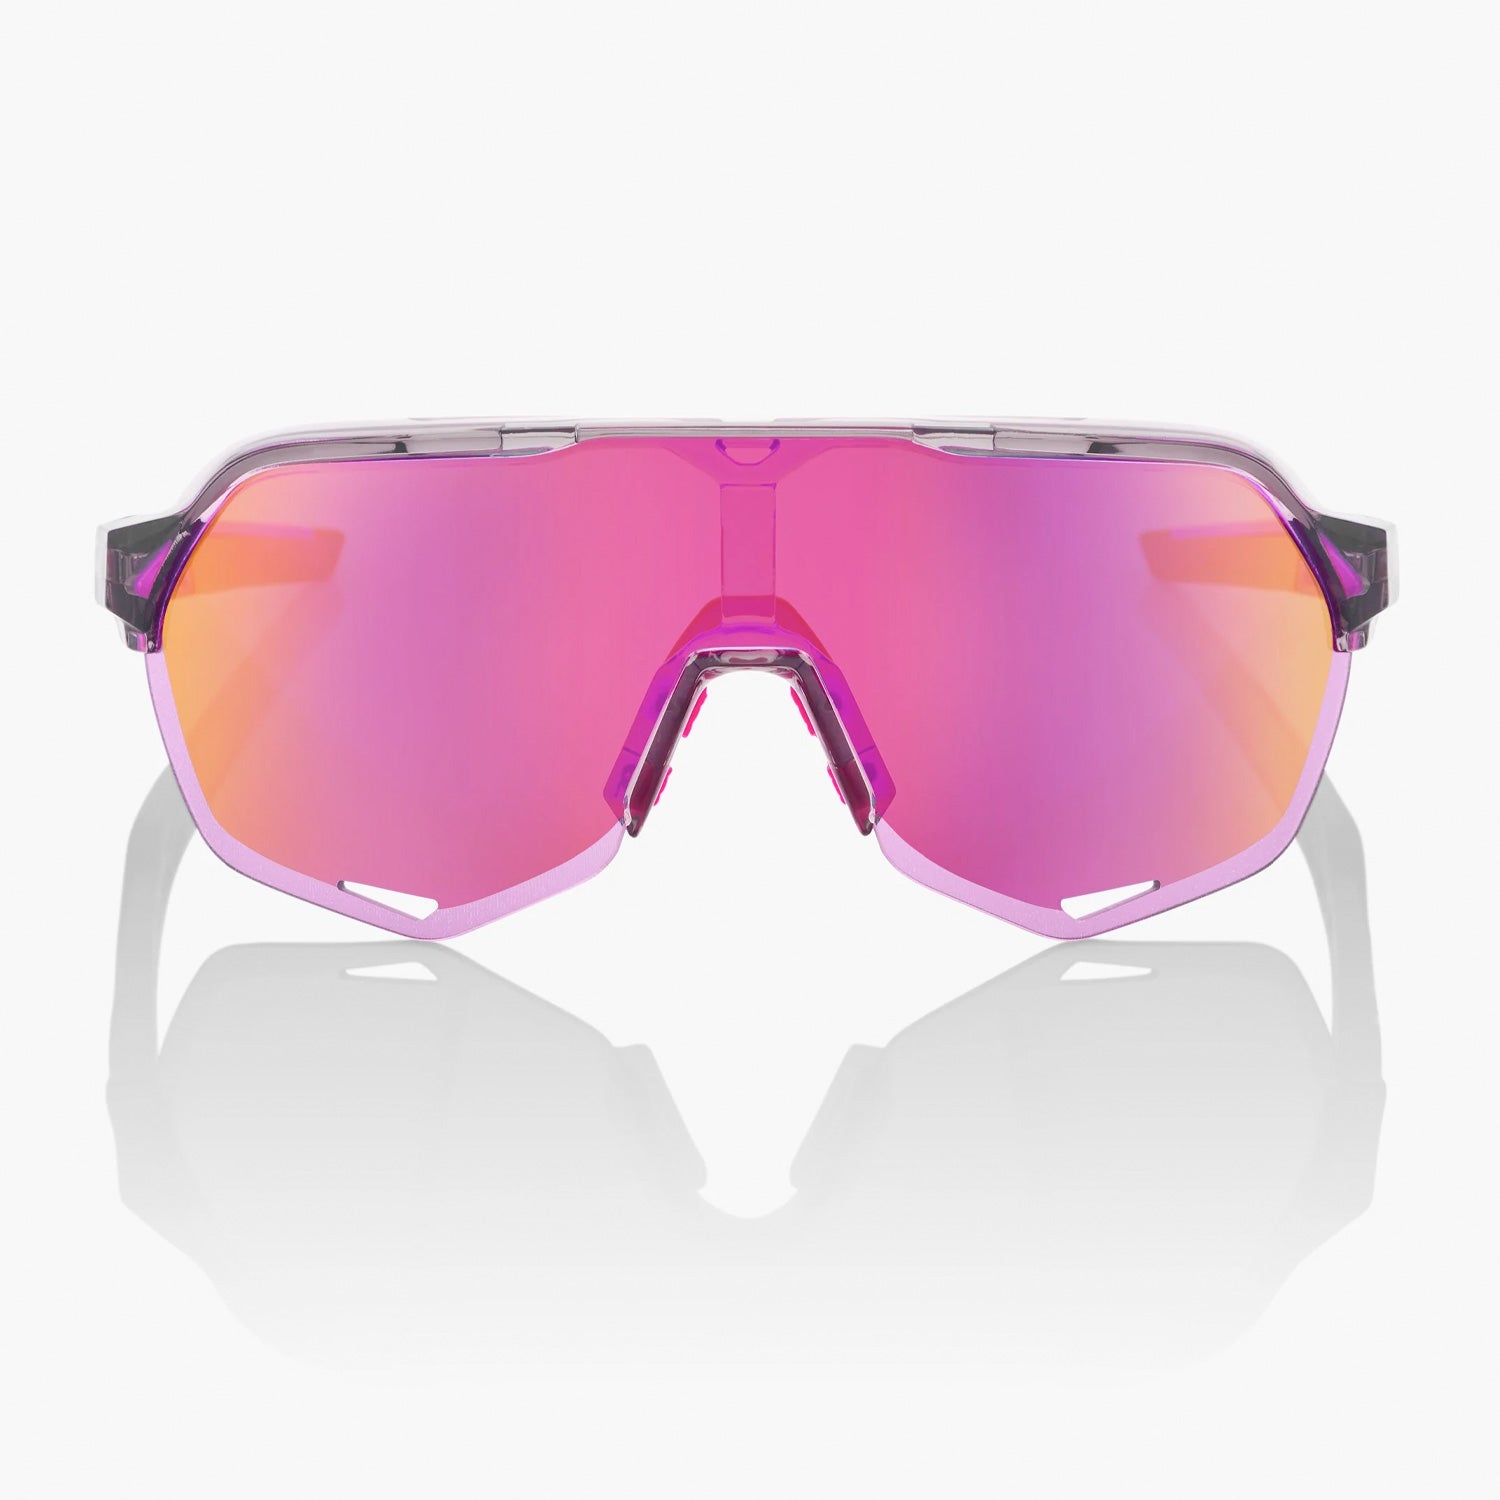 100% S2 Cycling Sunglasses - Tokyo Night Polished Translucent Grey with Purple Multilayer Mirror Lens